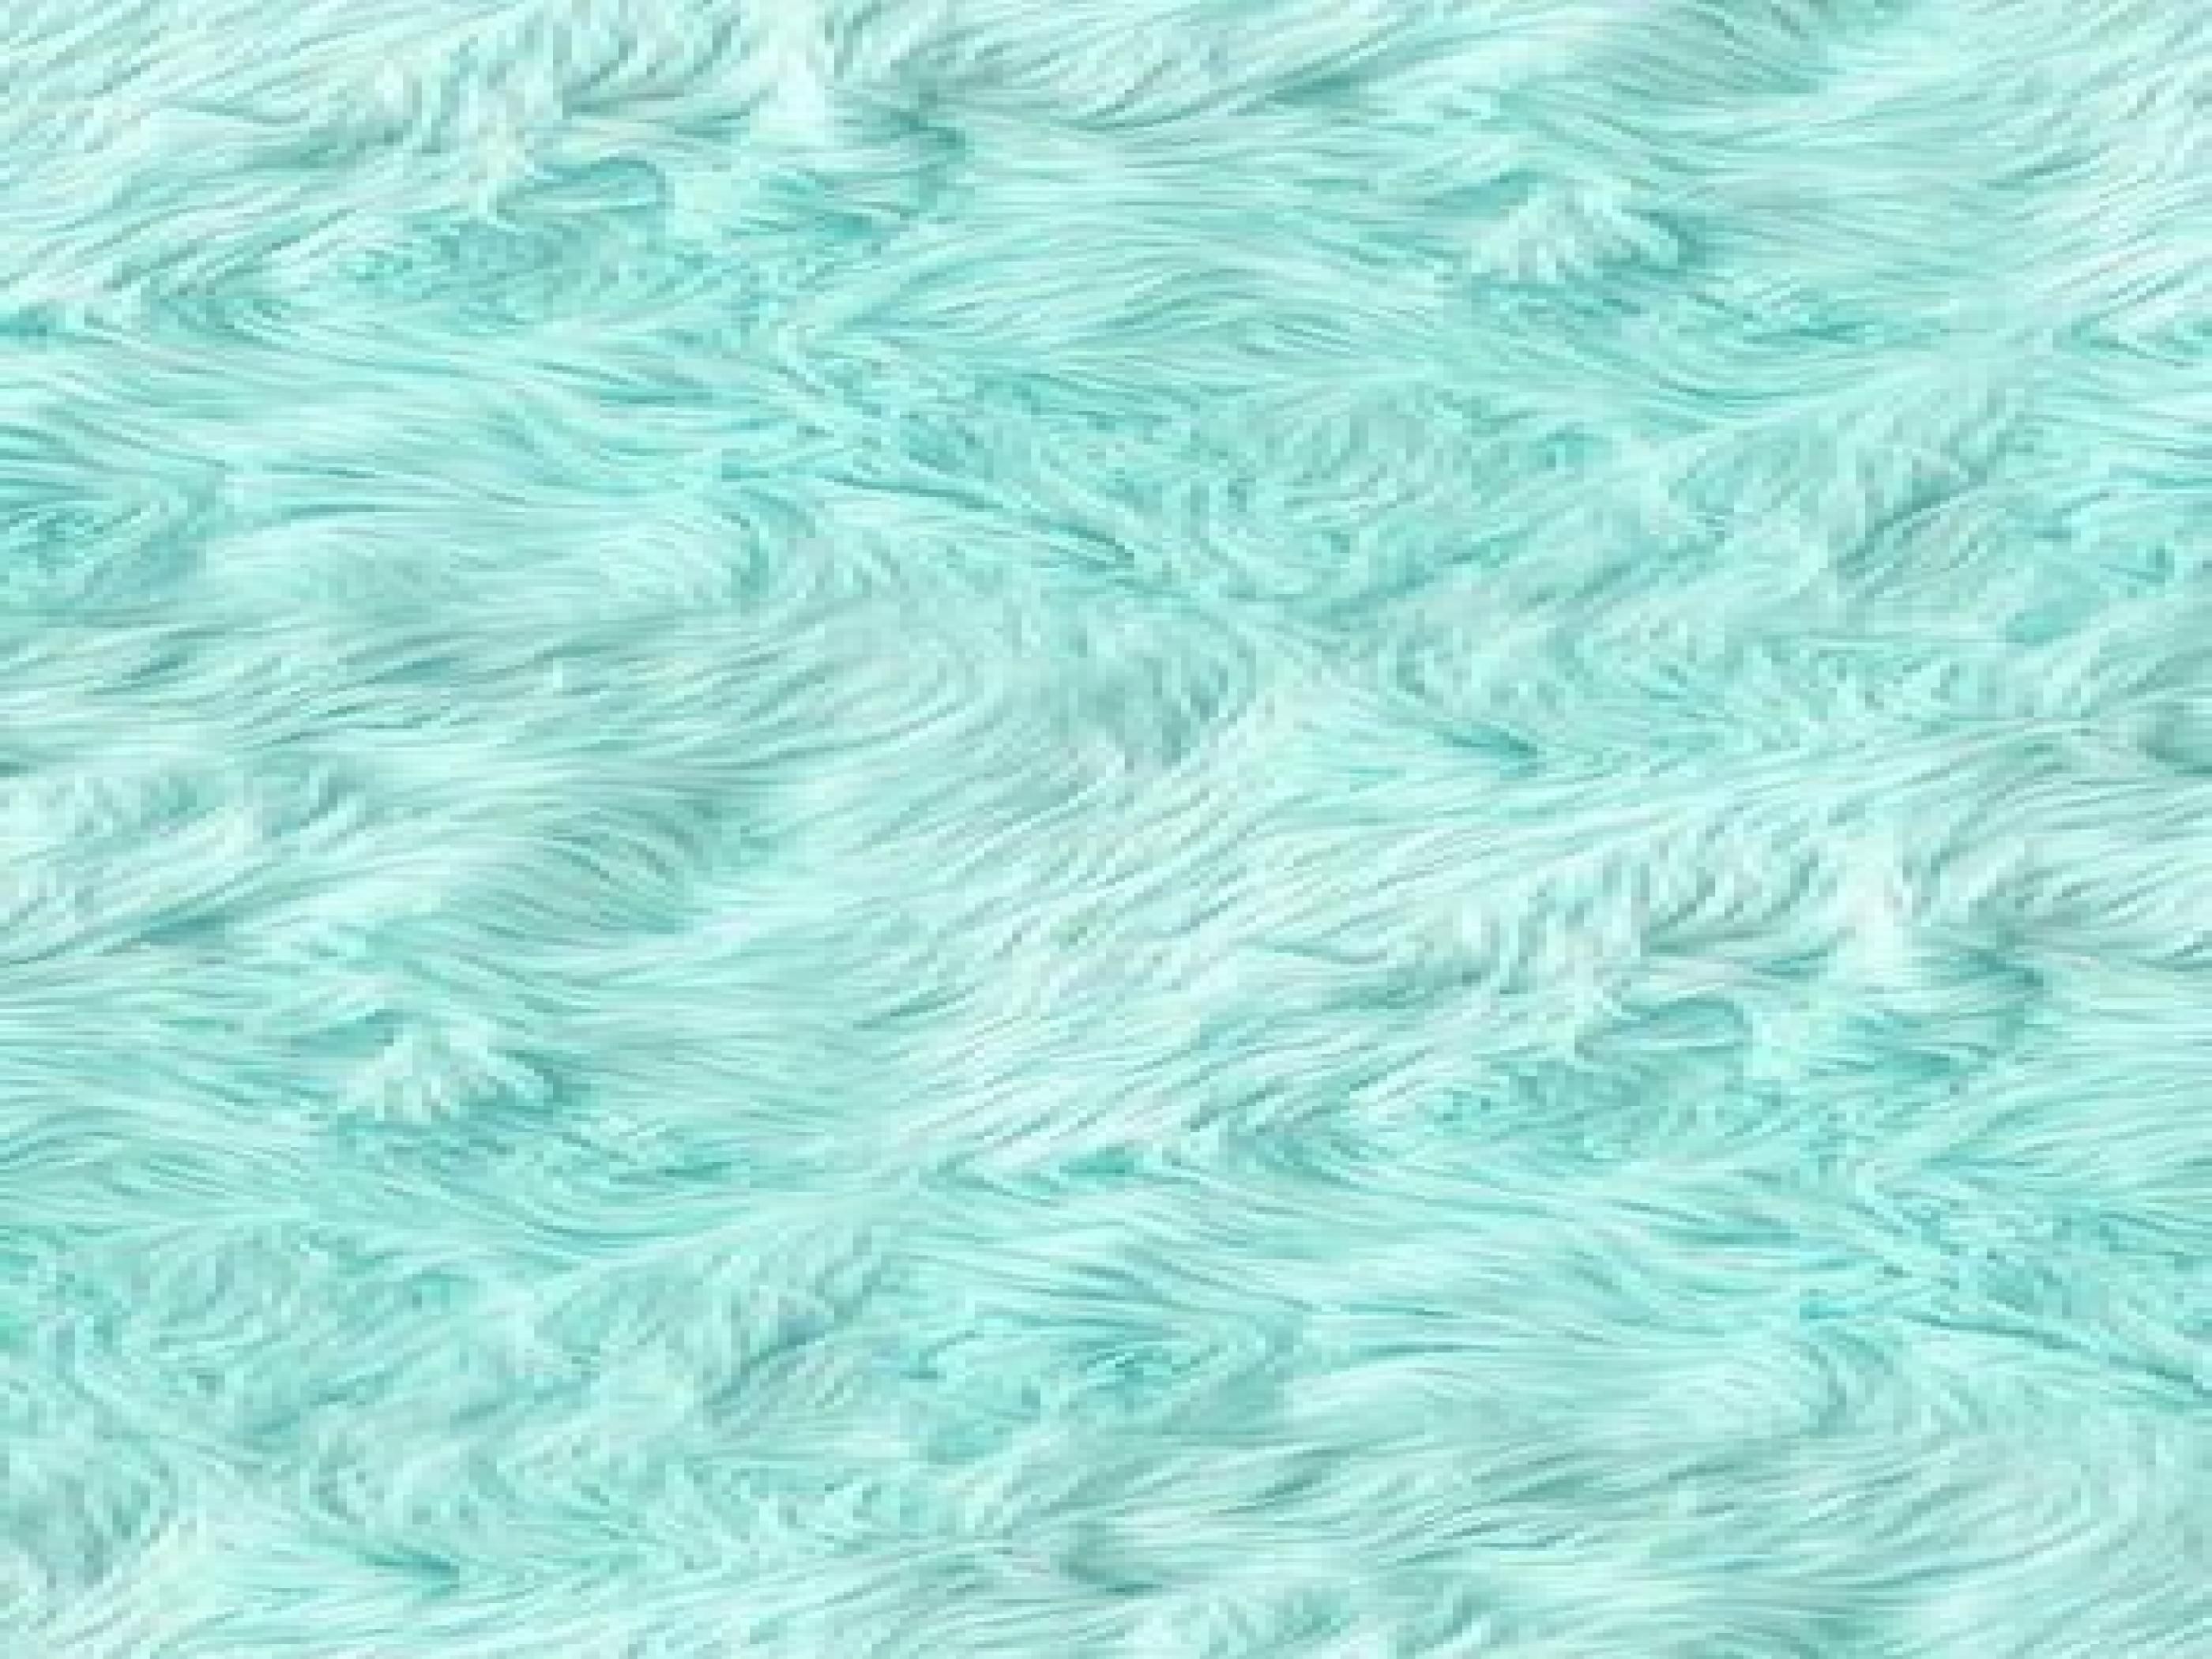 Aesthetic Teal Wallpapers posted by Zoey Simpson.